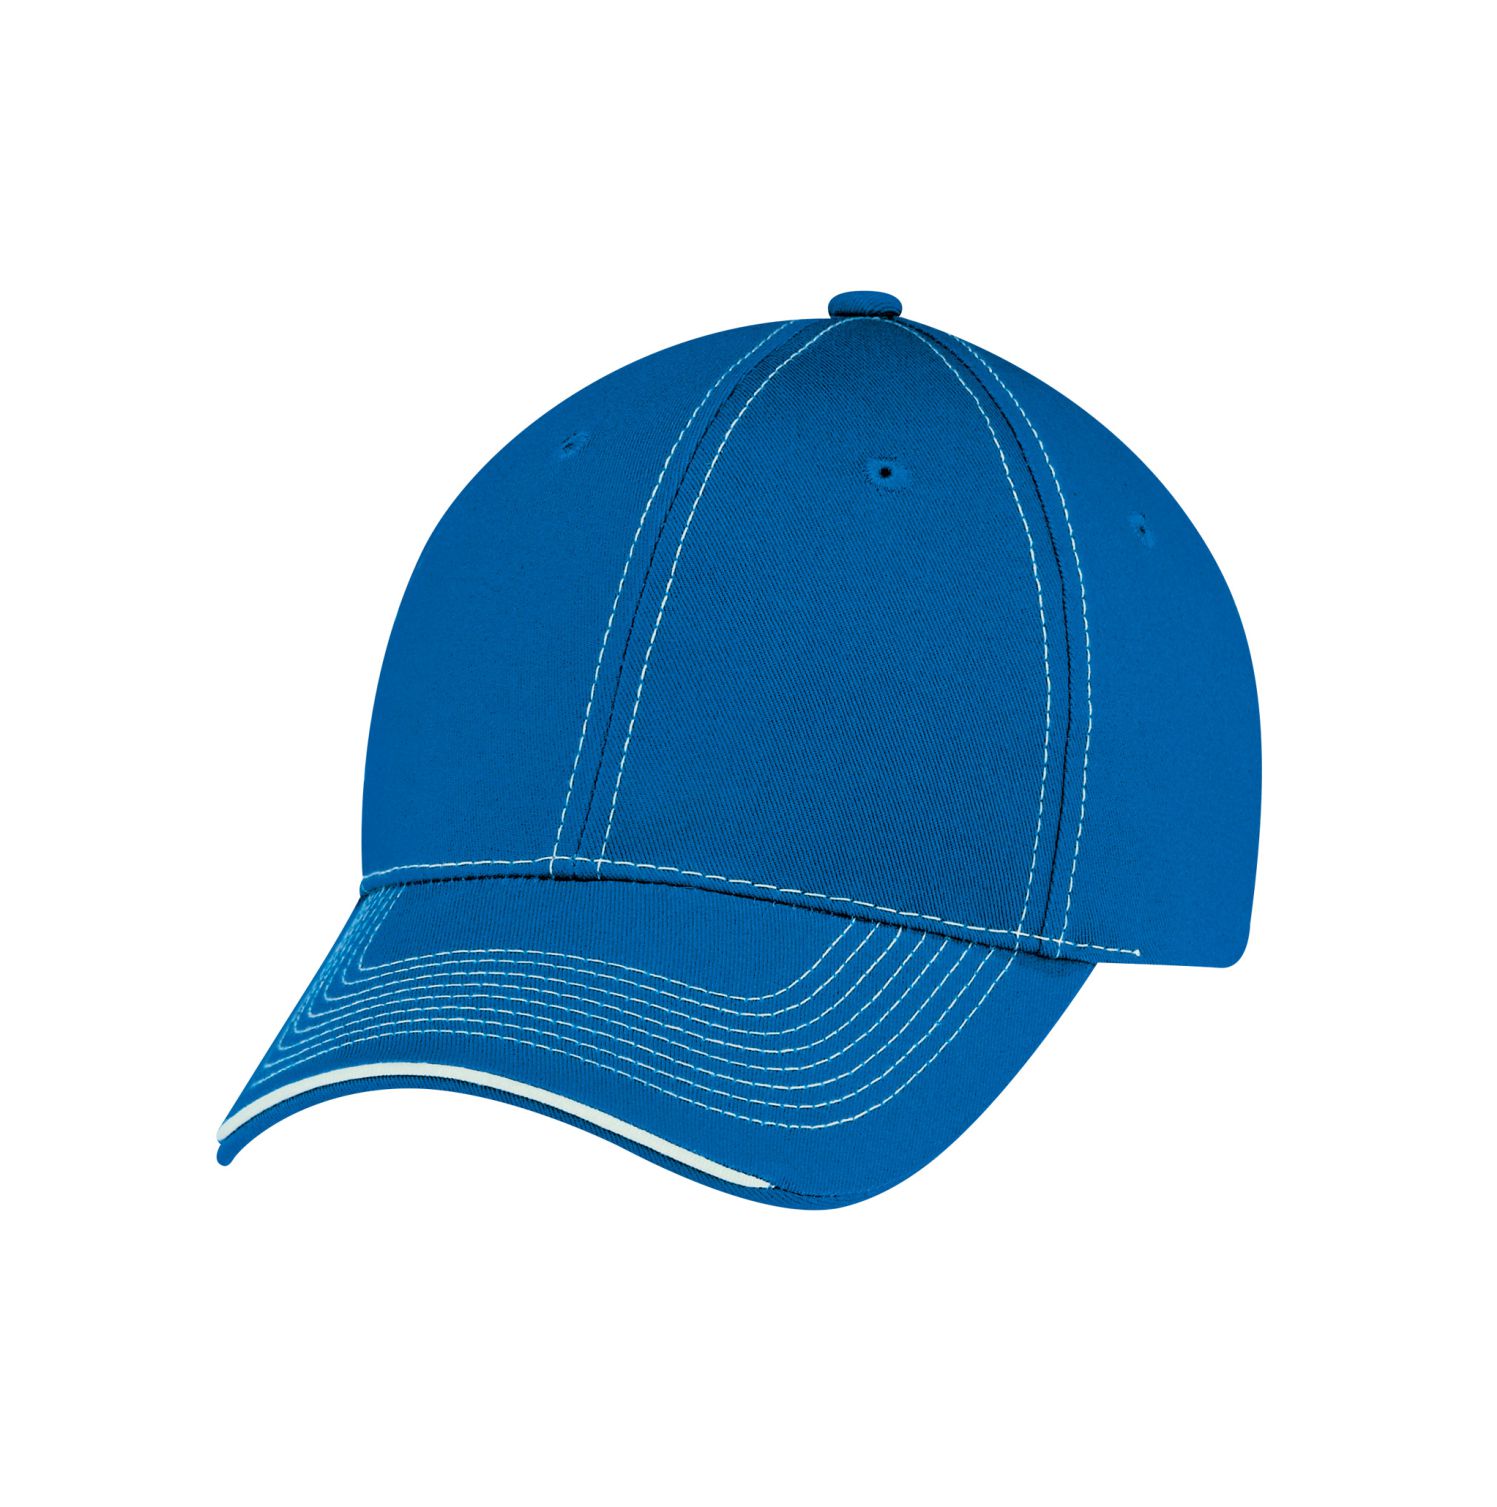 AJM 6-Panel Constructed Full-Fit Hat #6F617M Royal Blue / White